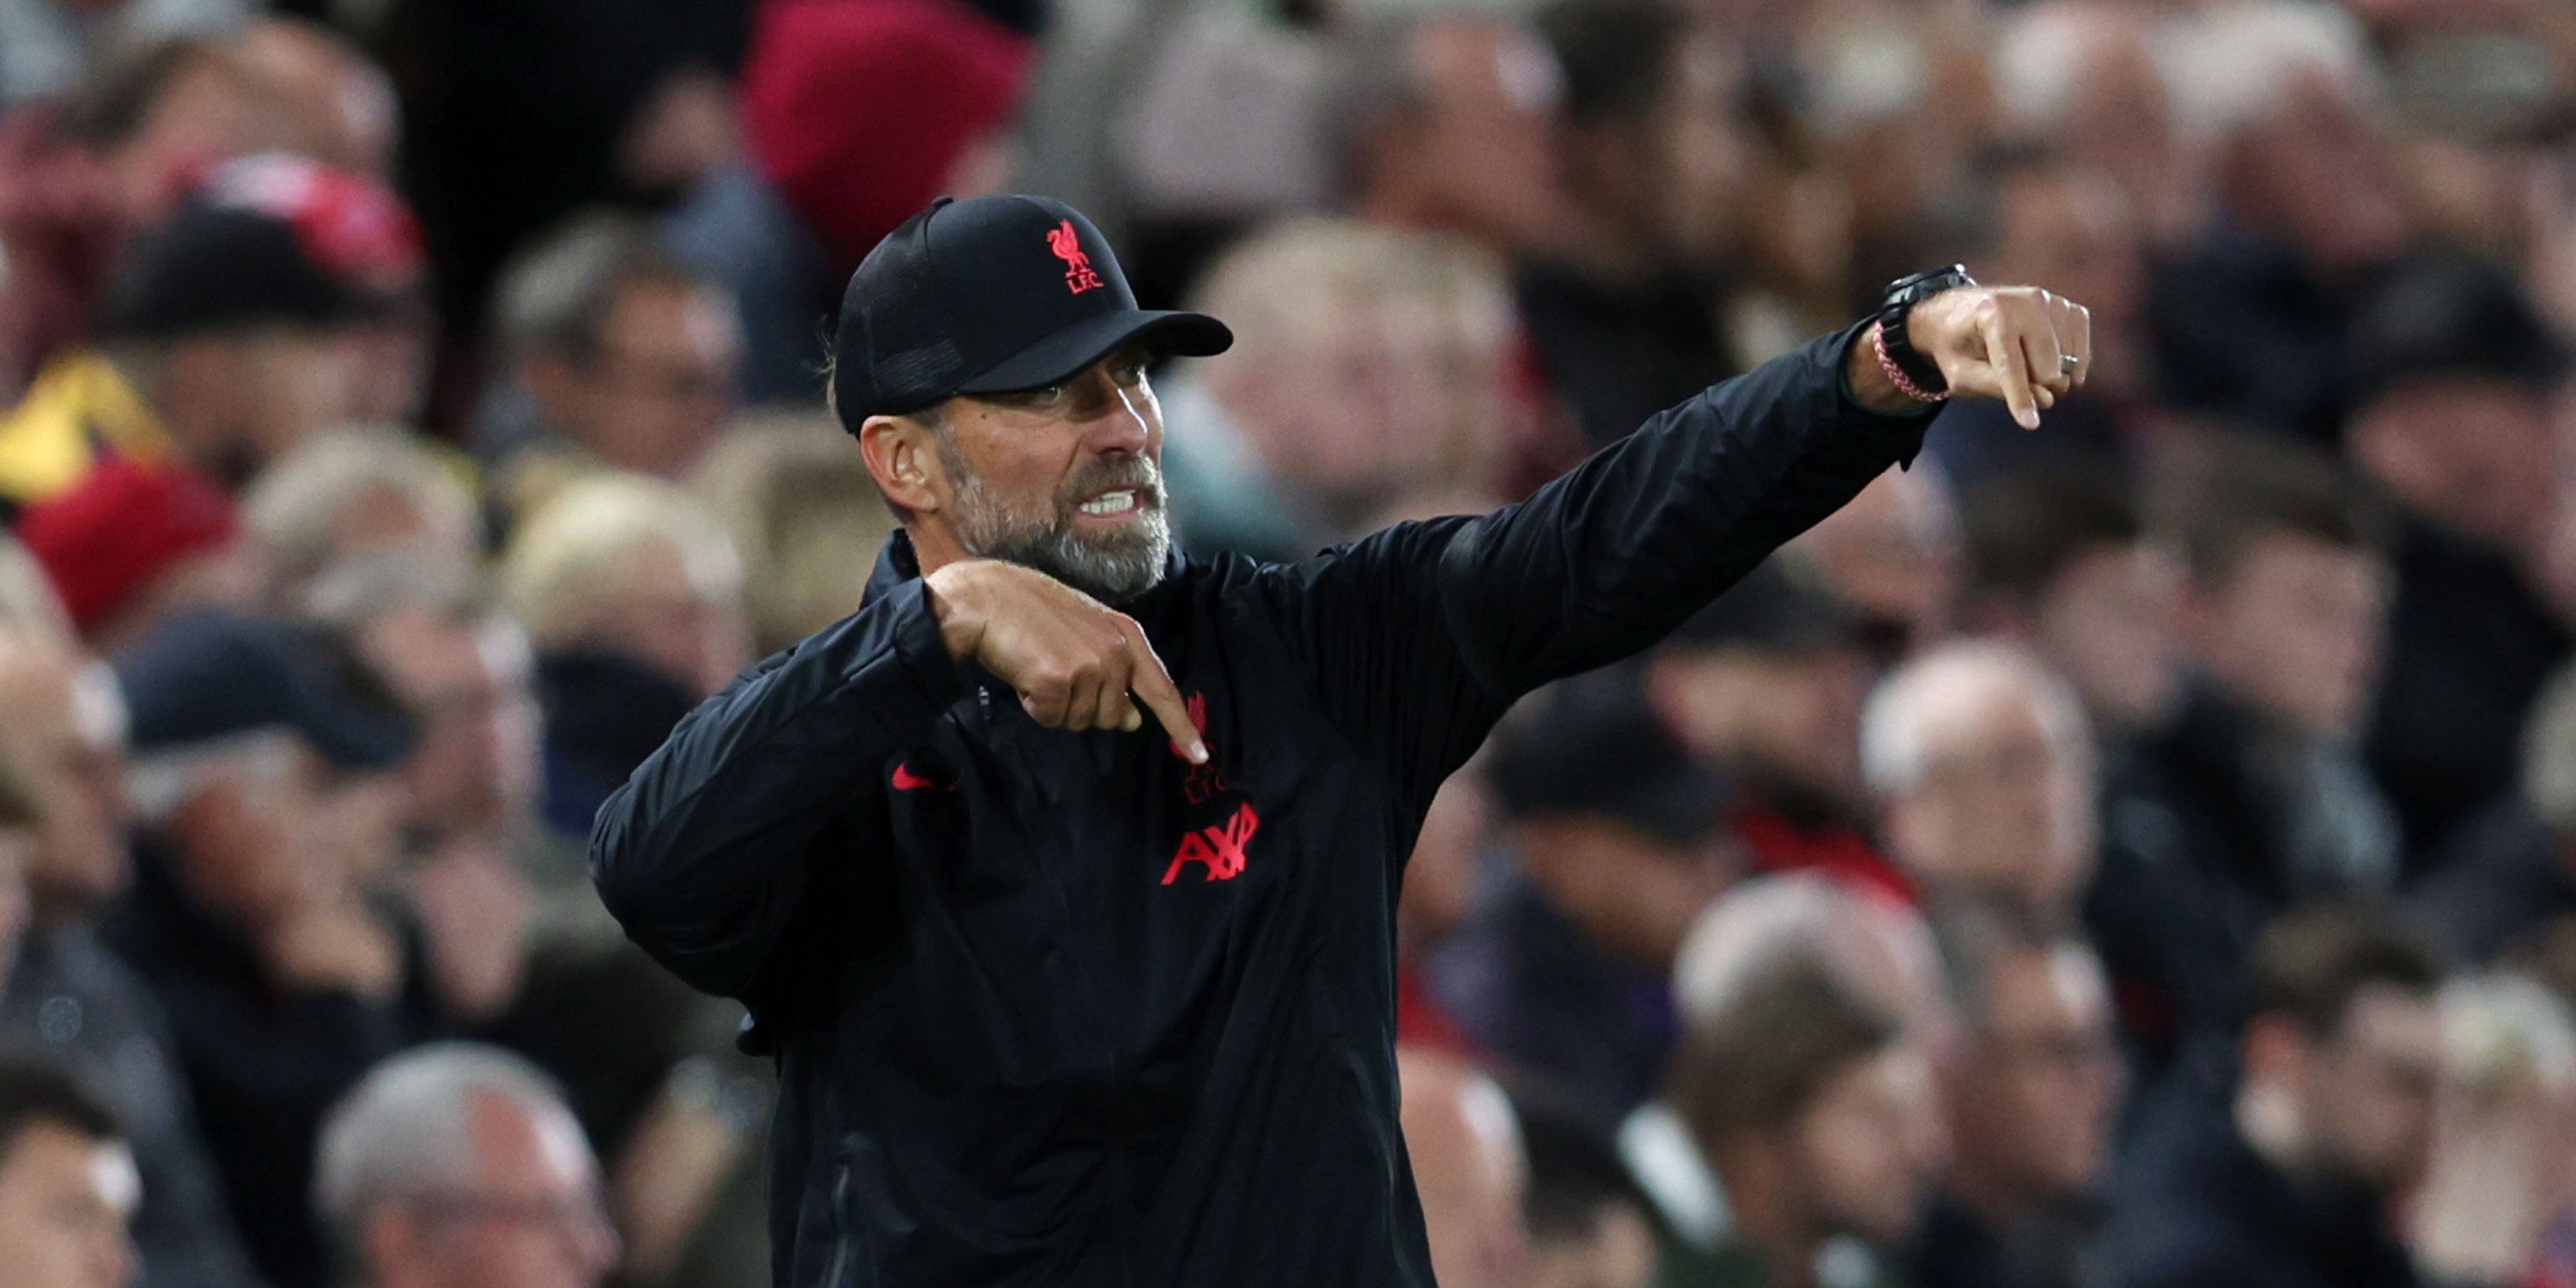 Paul Merson previews Liverpool’s clash with Arsenal and explains what changes Jurgen Klopp will make from Rangers victory